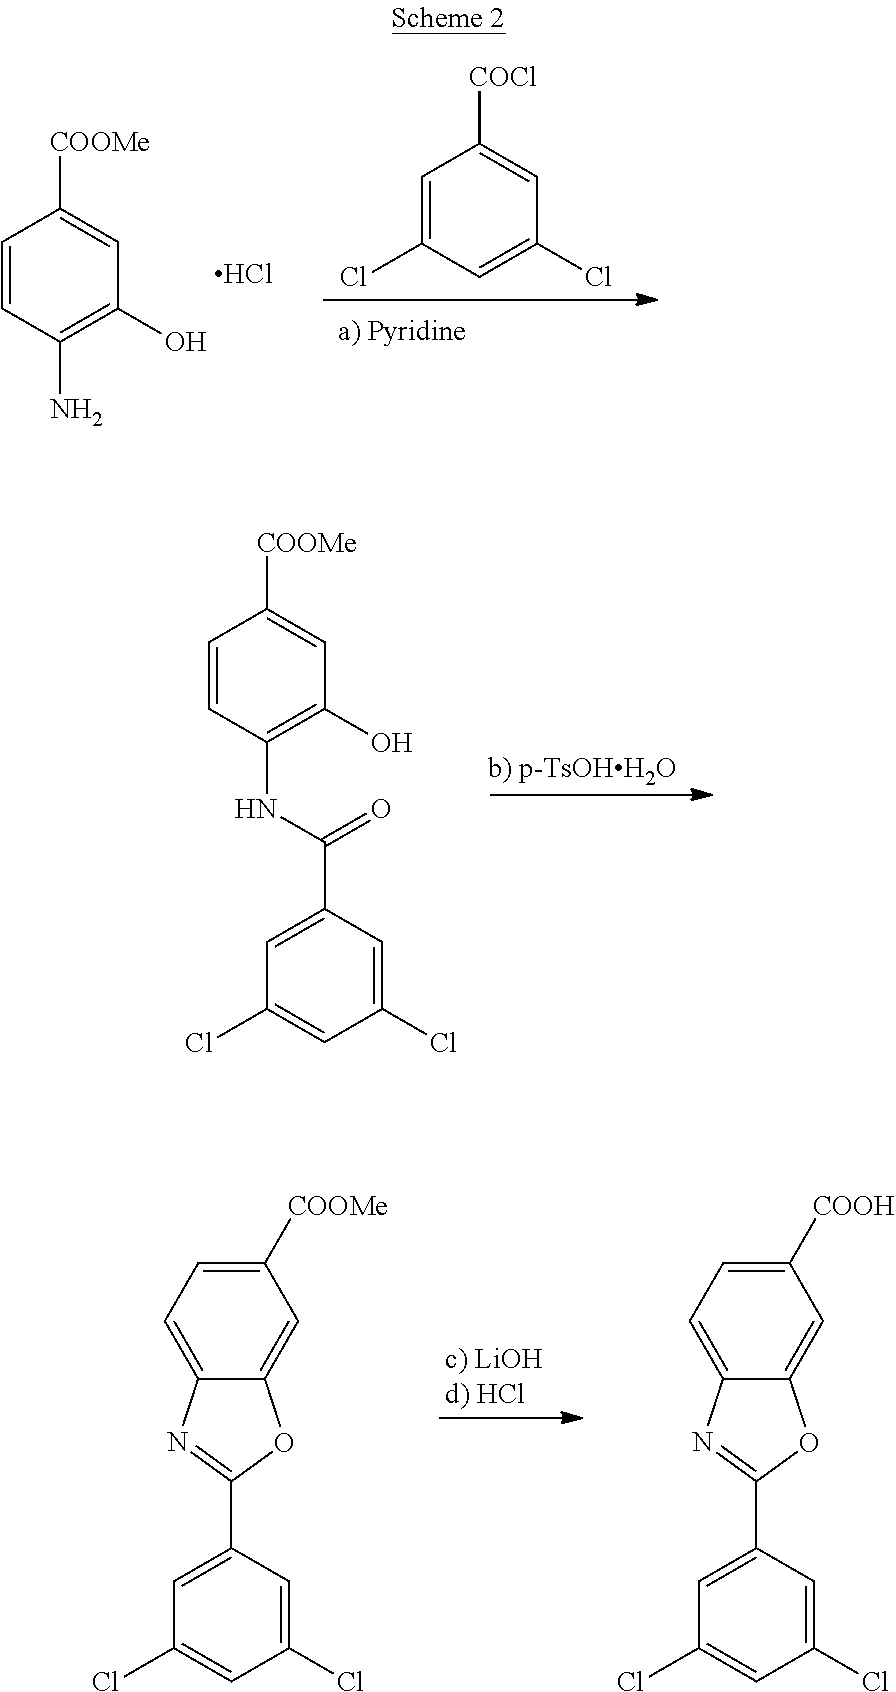 Process for Preparing 1-deoxy-1-methylamino-D-glucitol 2-(3,5-dichlorophenyl)-6-benzoxazolecarboxylate